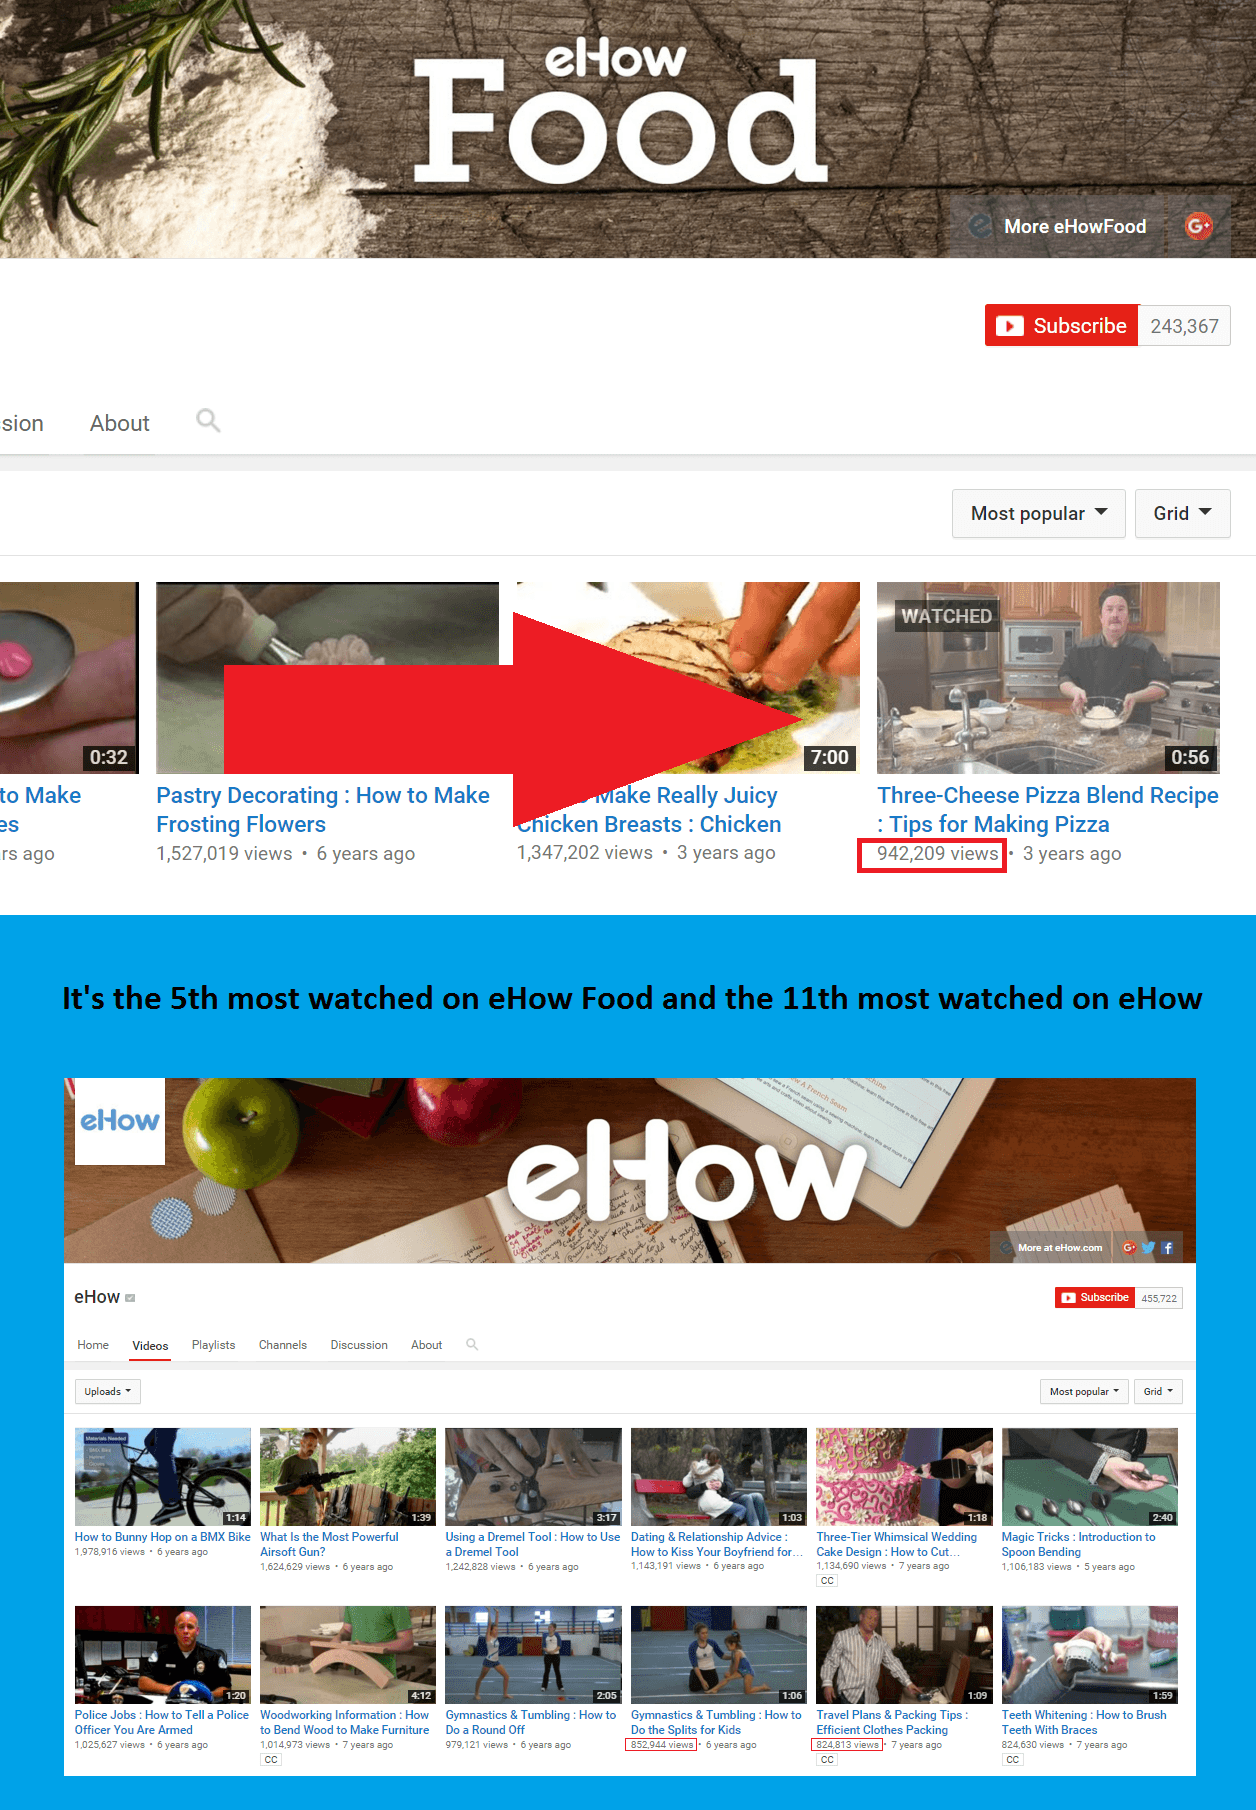 eHow Logo - Remember the 3 cheese pizza blend eHow guy? He video is now one